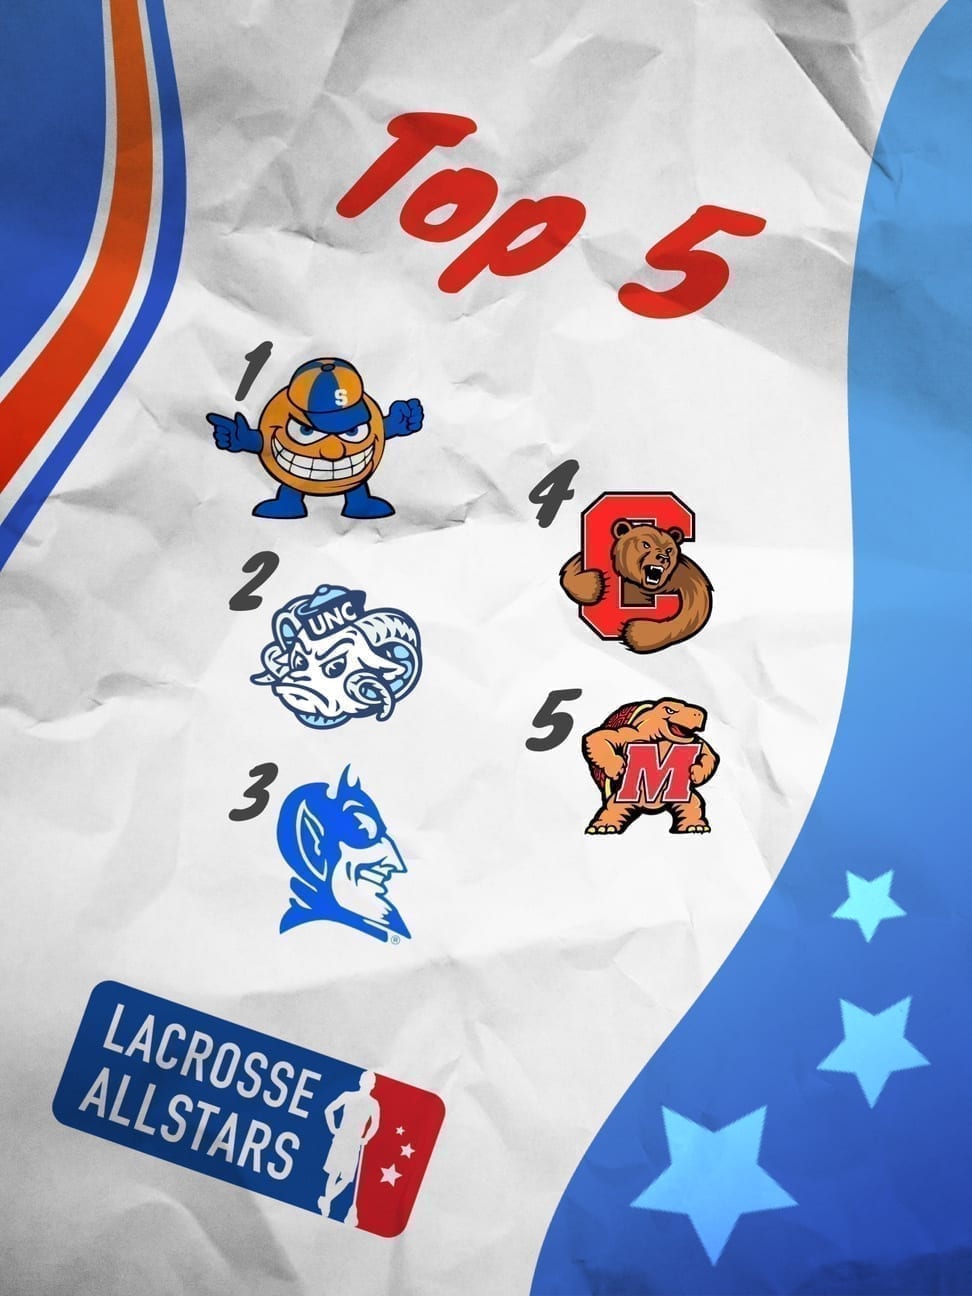 With the 2021 NCAA DI men's lacrosse season beginning to start, the weekly rankings are back, listing out the nation's top-20 teams.